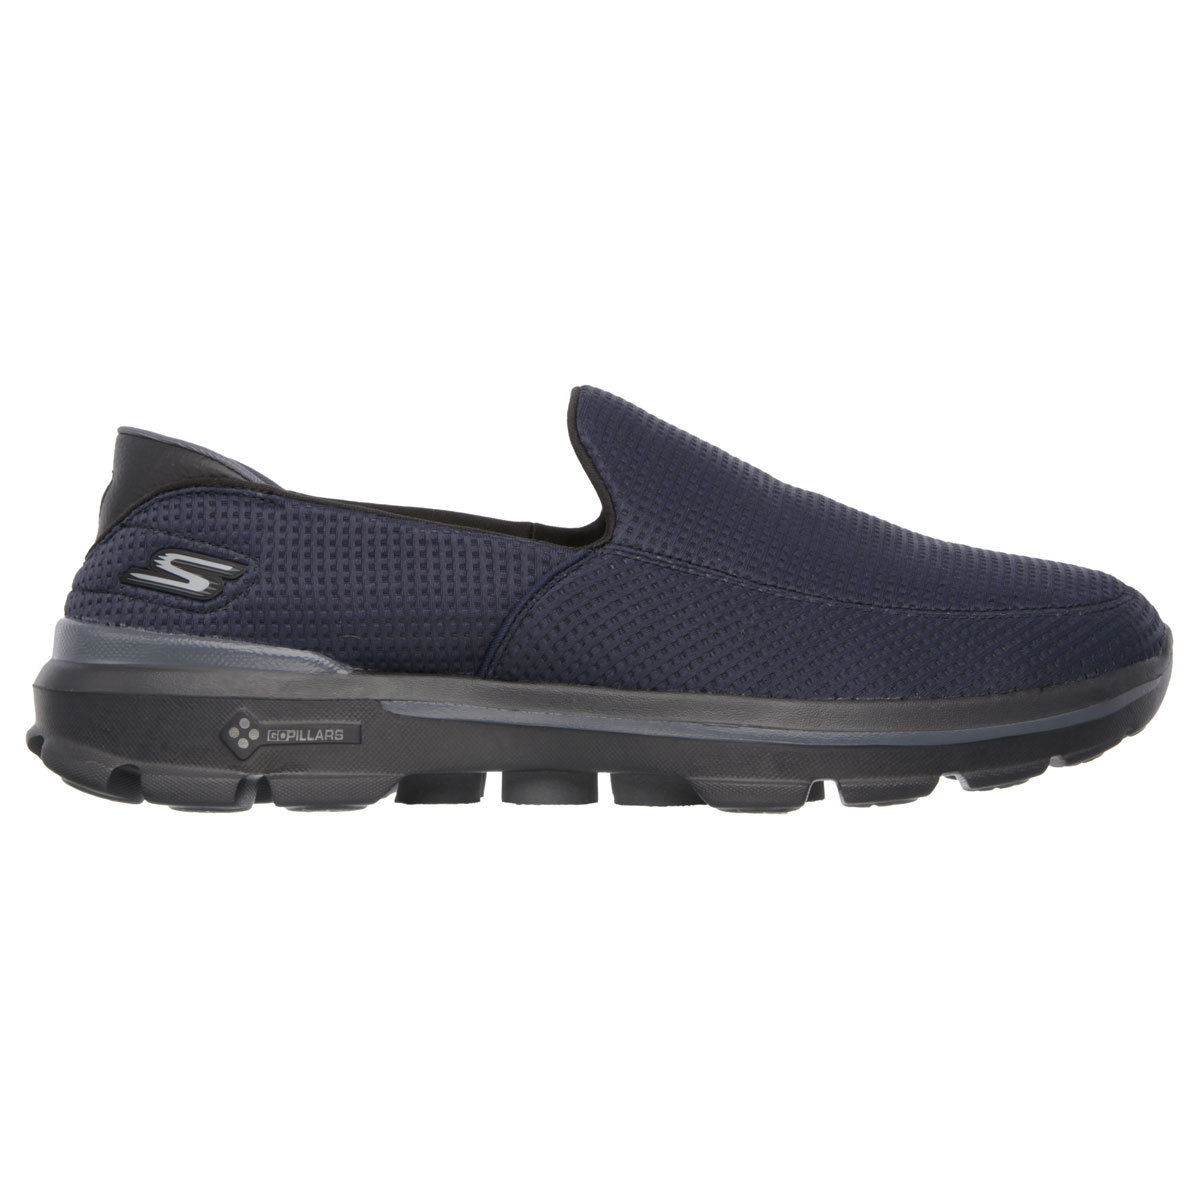 Skechers GOwalk 3 Unfold Men's Shoes Available in 2 Colours and 6 Sizes ...